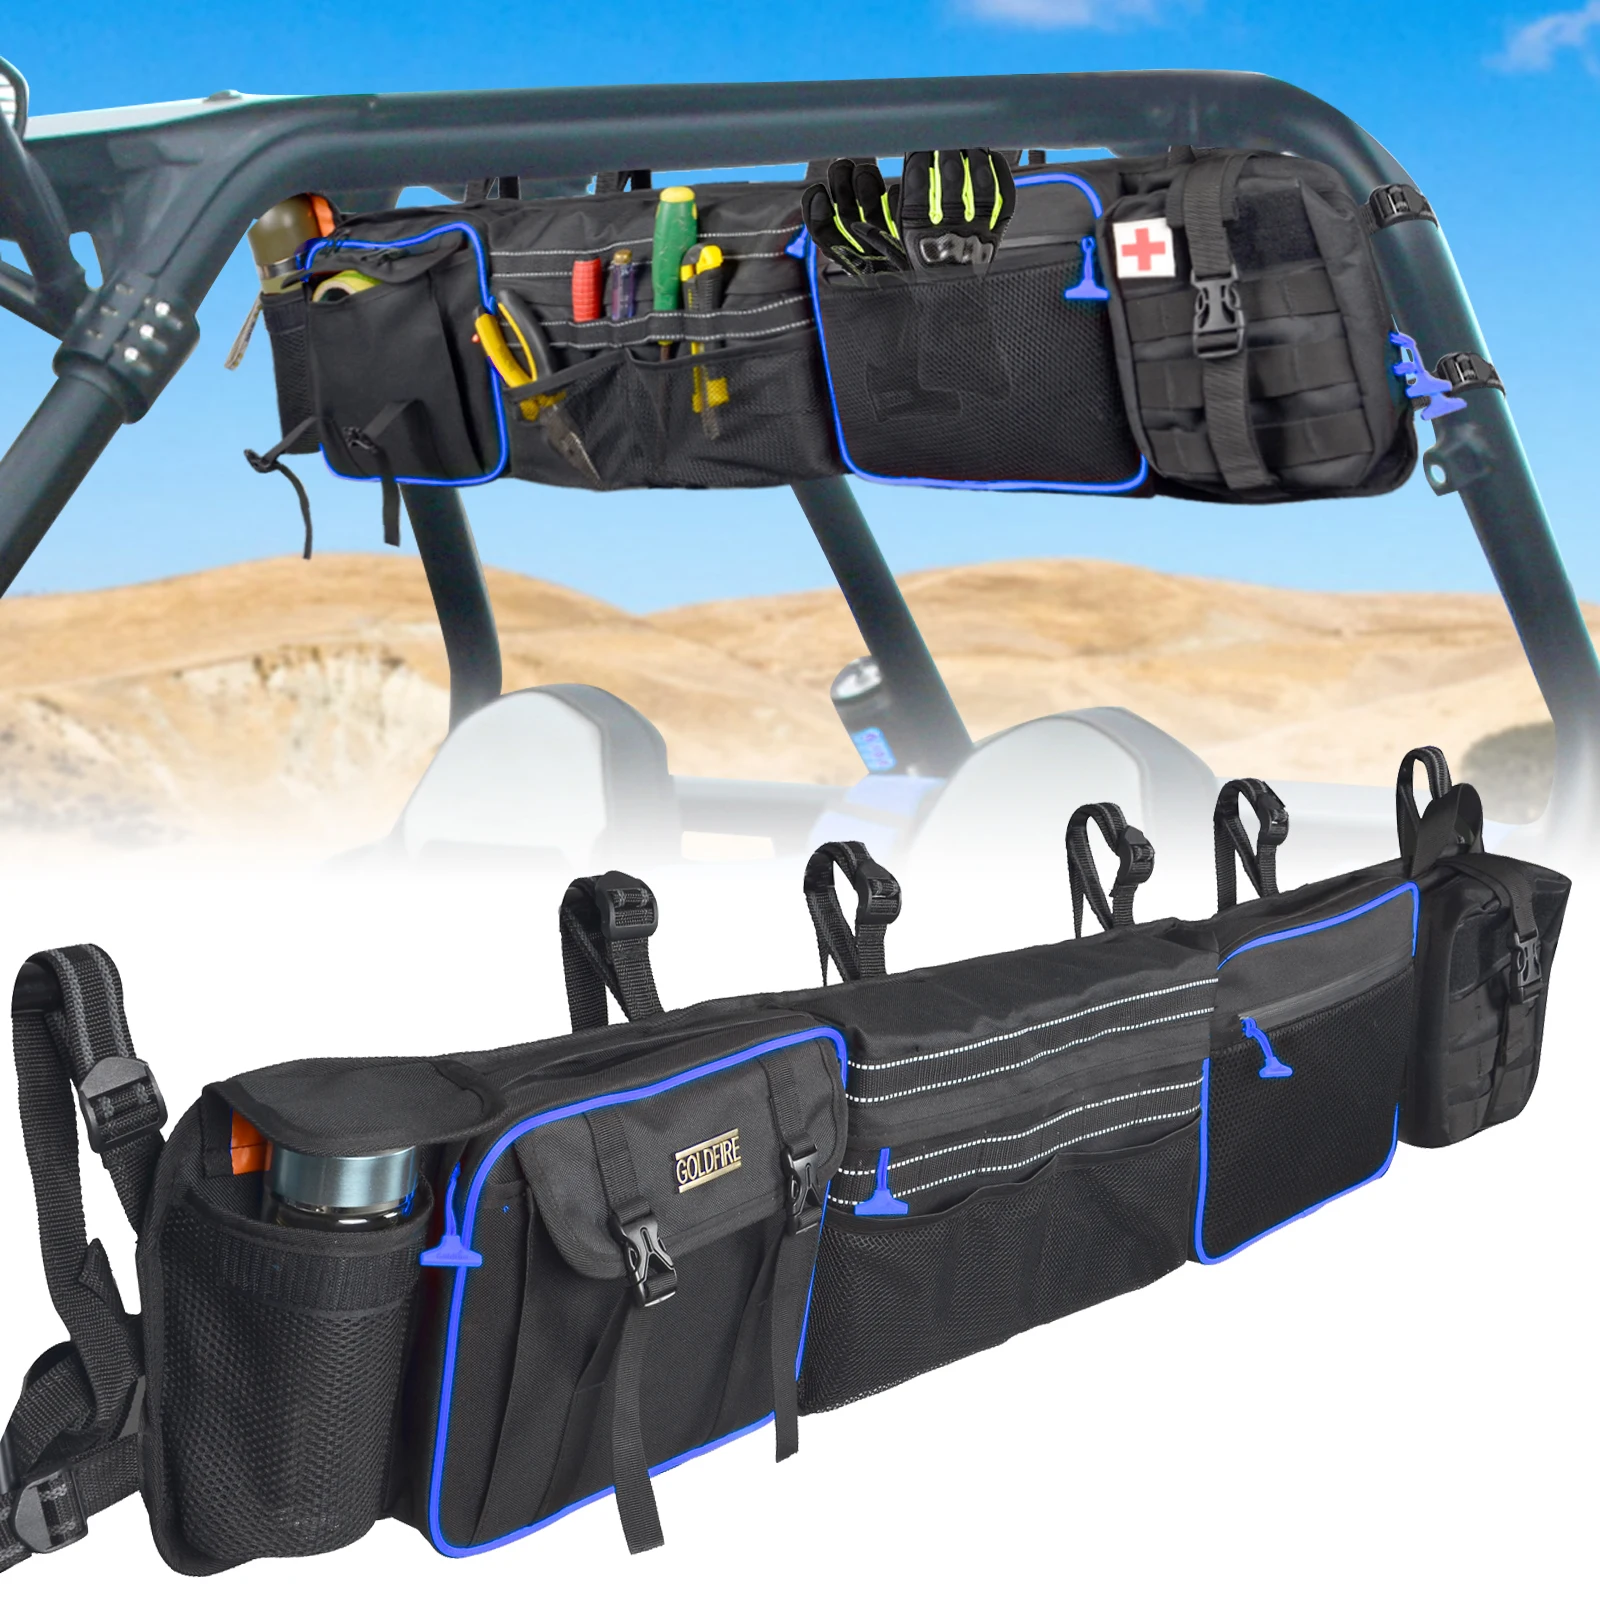 UTV Large Roll Cage Organizer Cargo Rear Storage Bag Gear Bags First Aid Pouch with Reflective Strip For Most Full Size UTVs